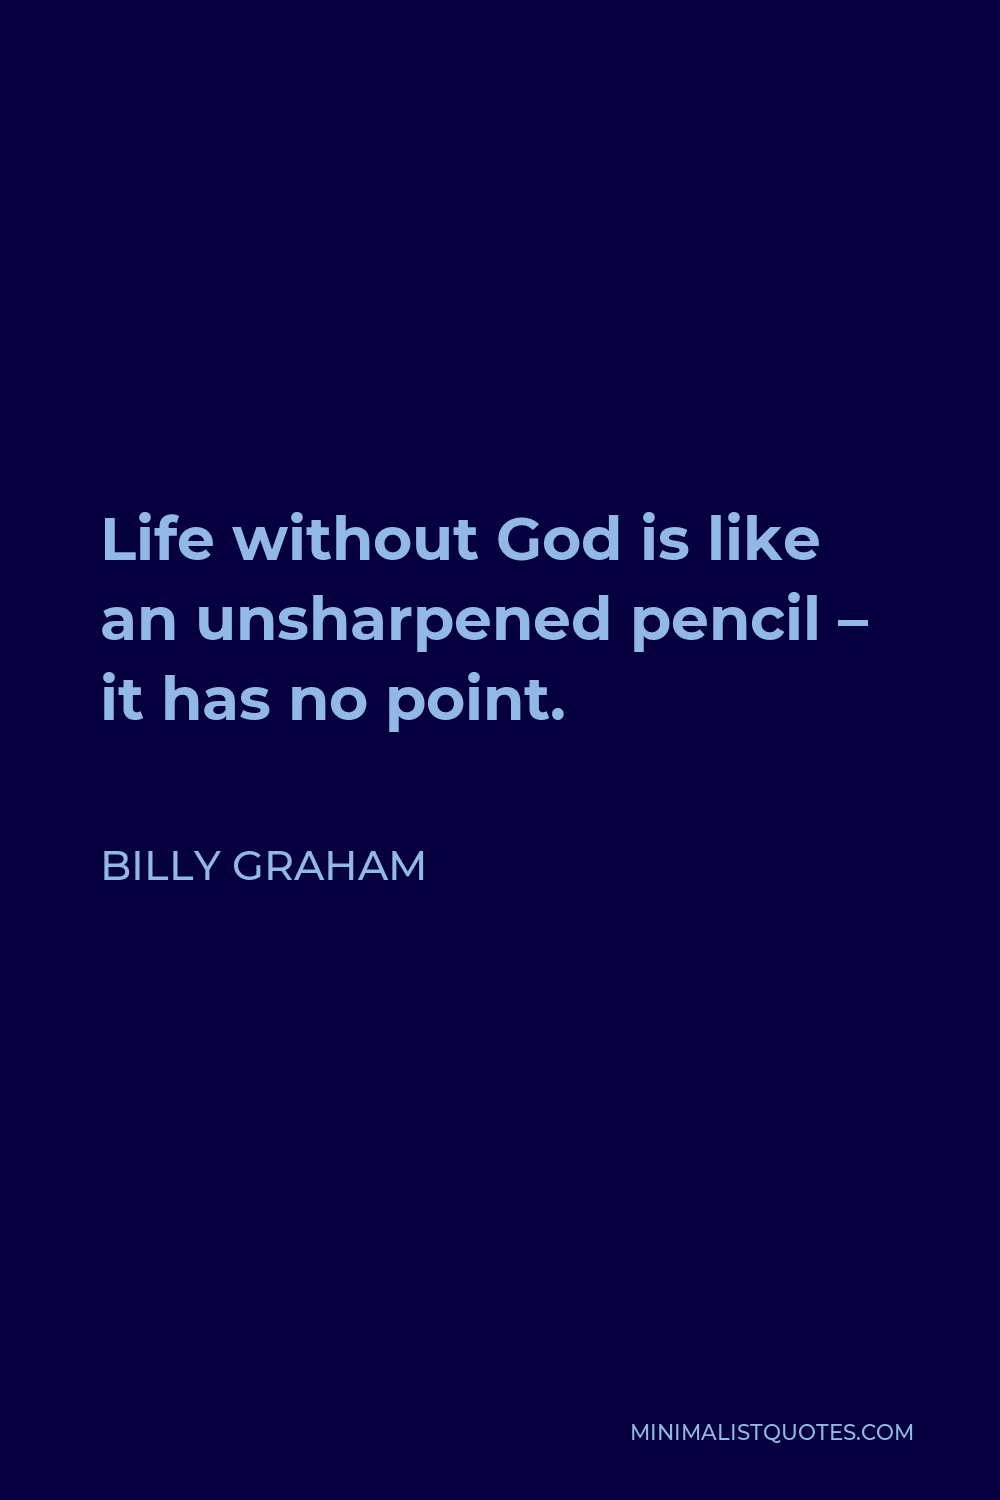 Billy Graham Quote - Life without God is like an unsharpened pencil – it has no point.